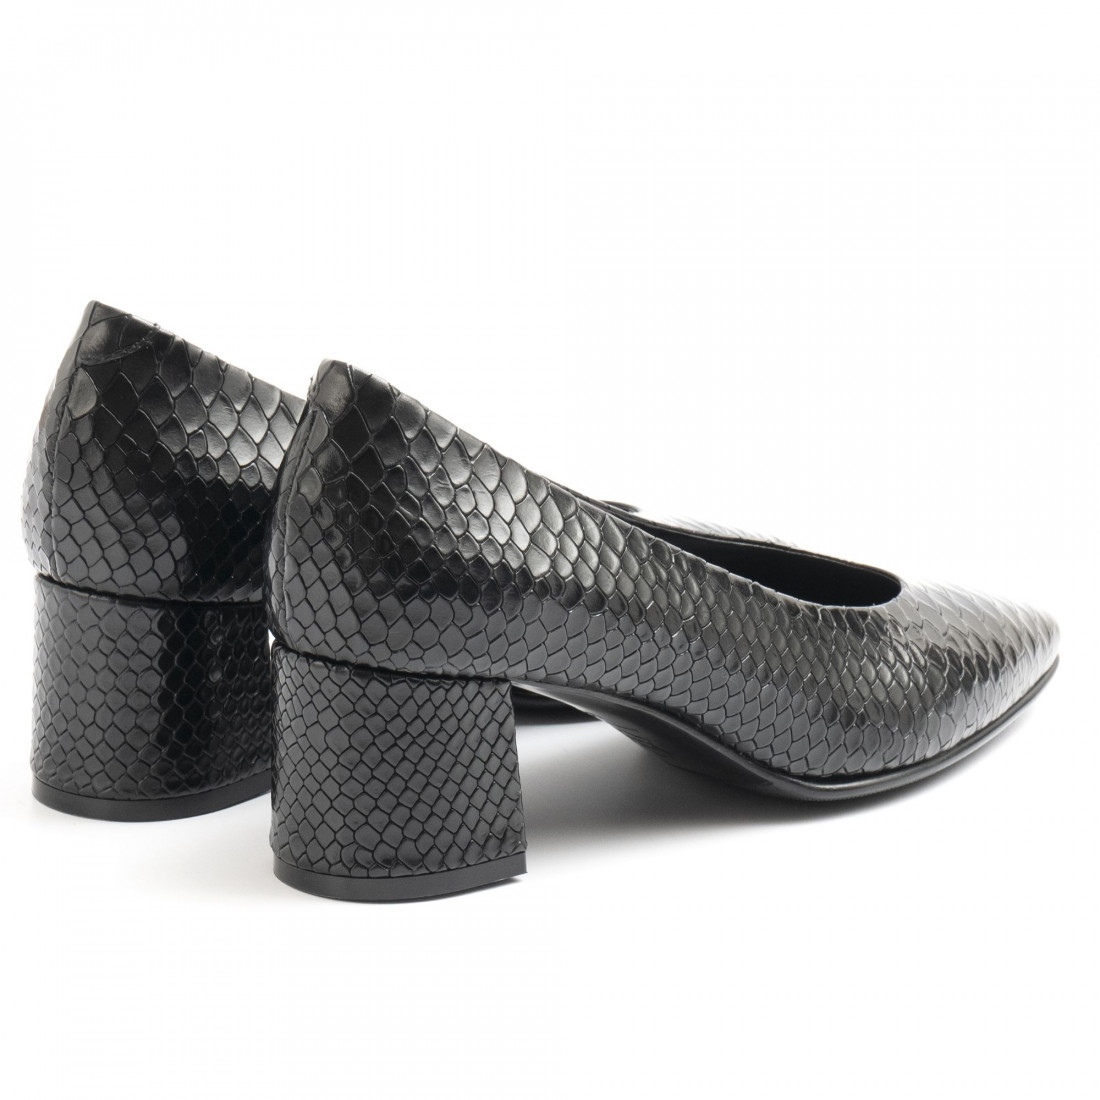 Women's Franca heeled shoes in black python print leather